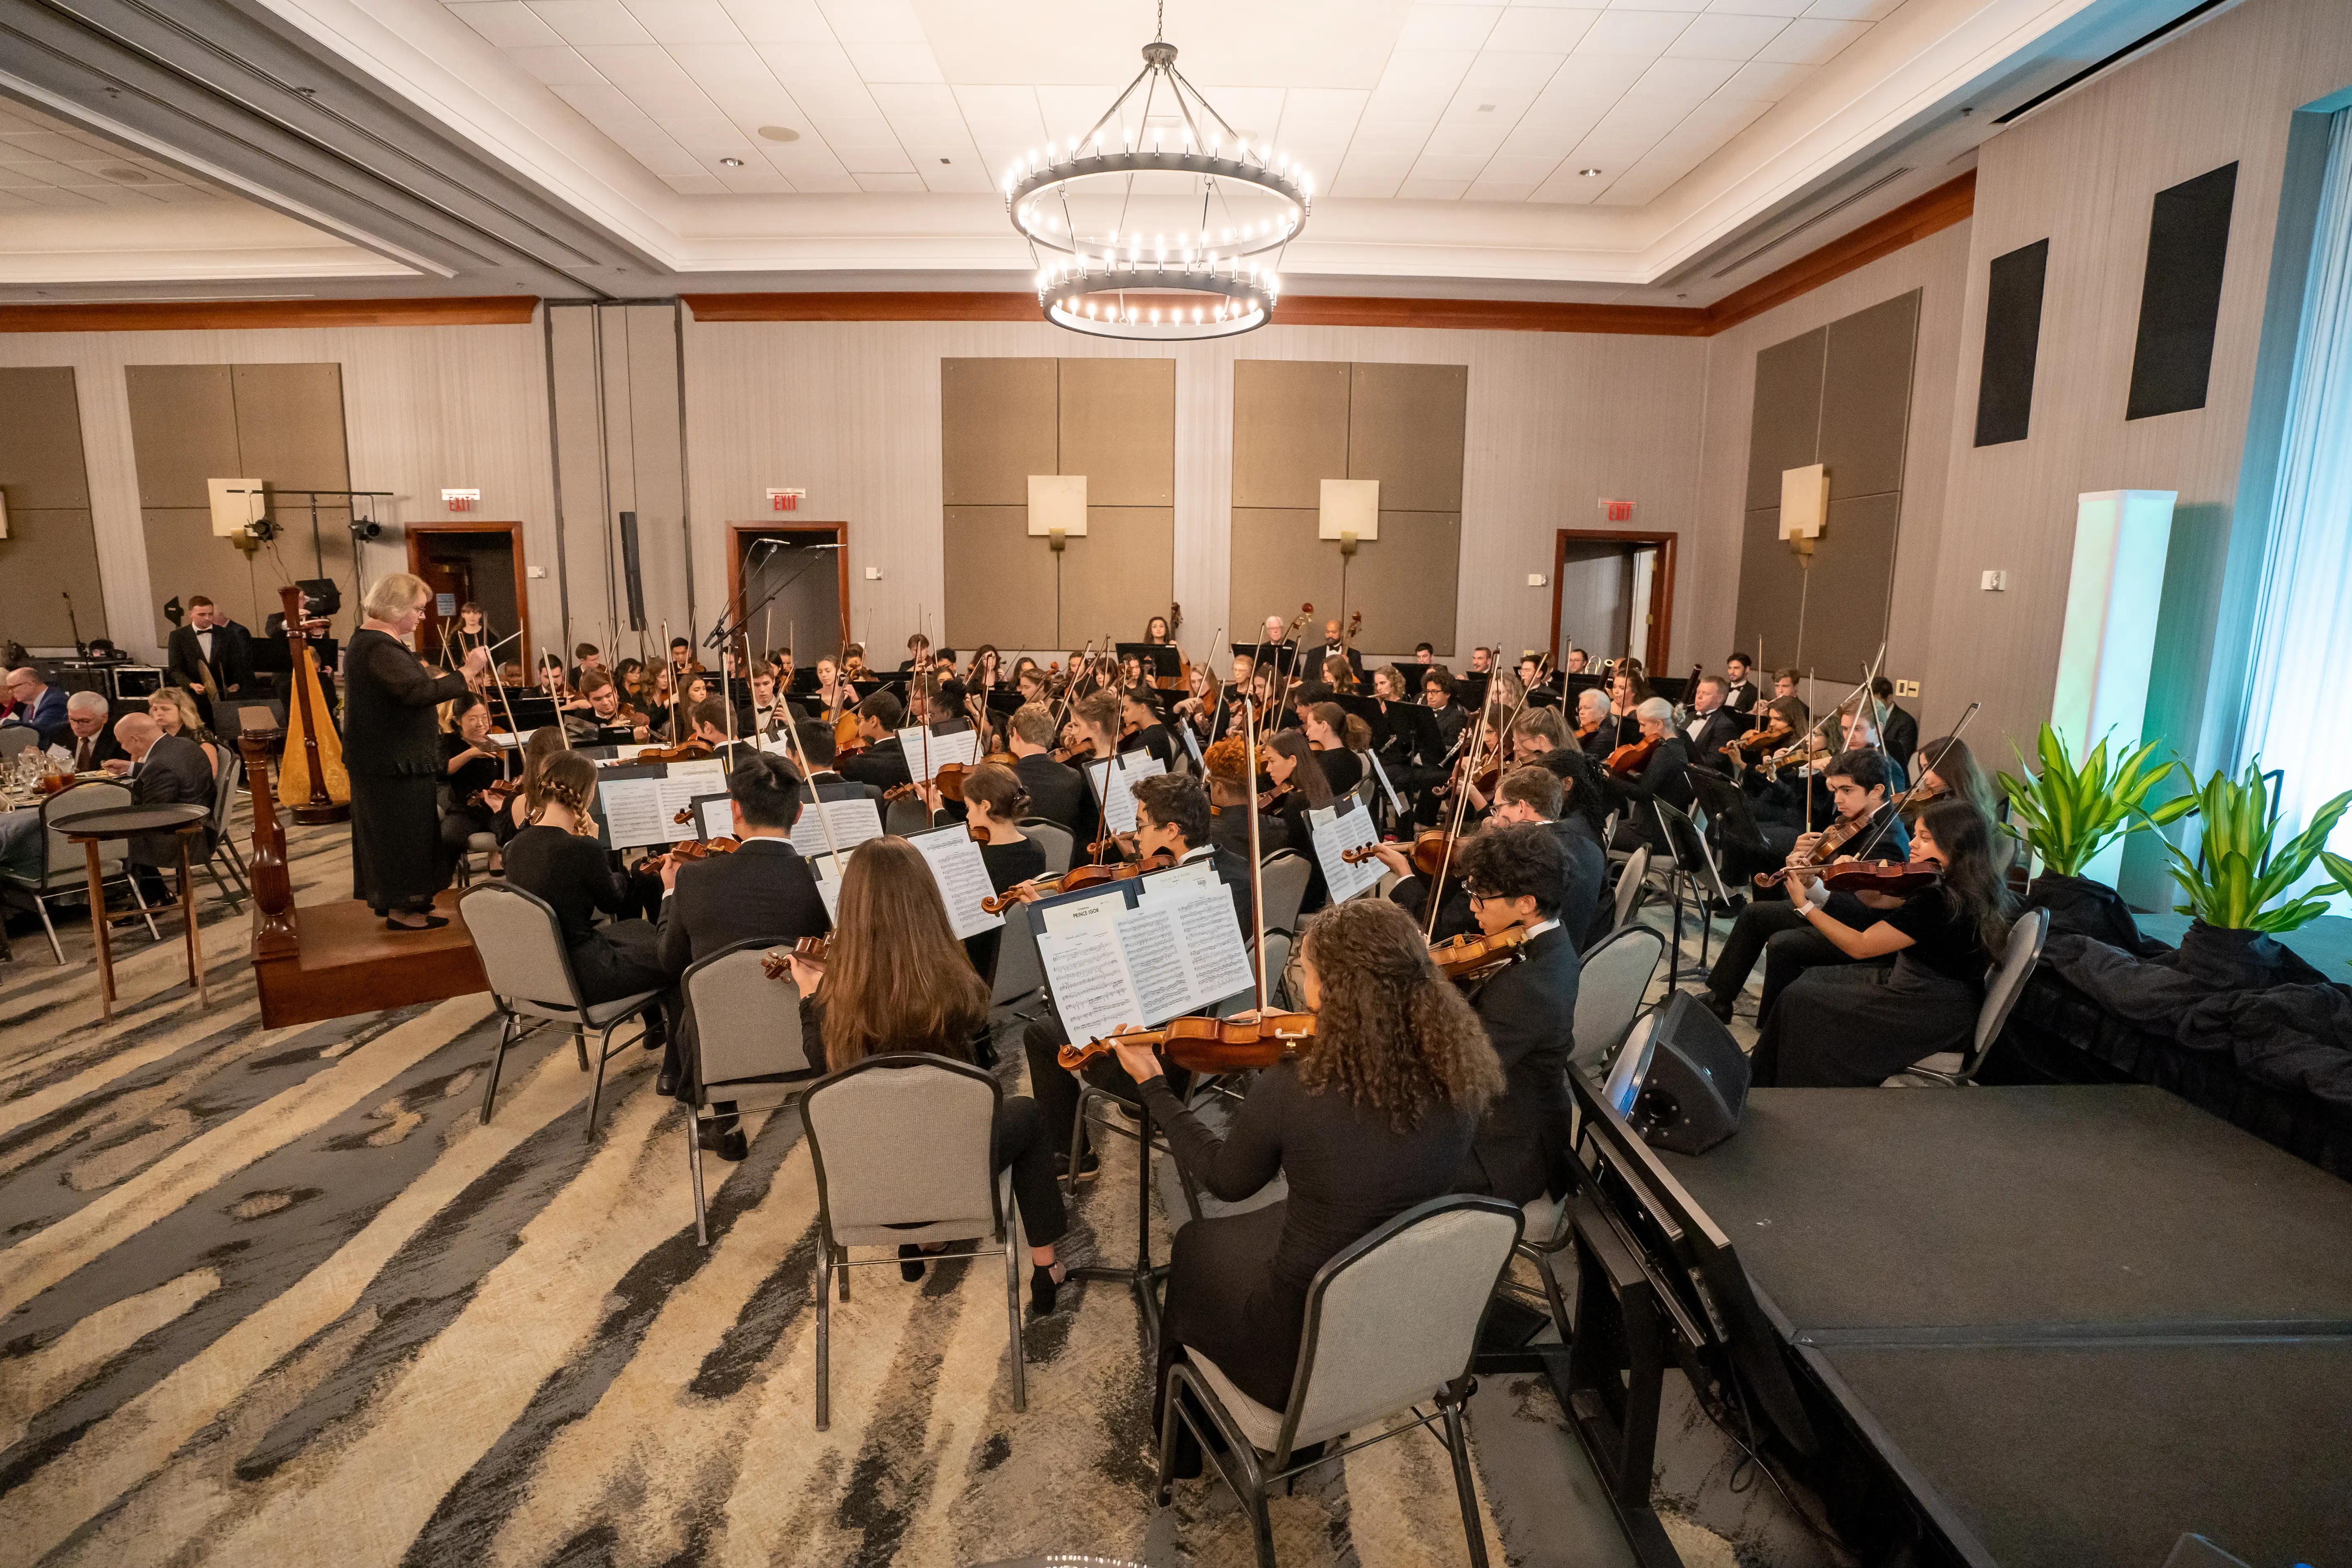 The Southern Adventist University Symphony Orchestra performing for the guests